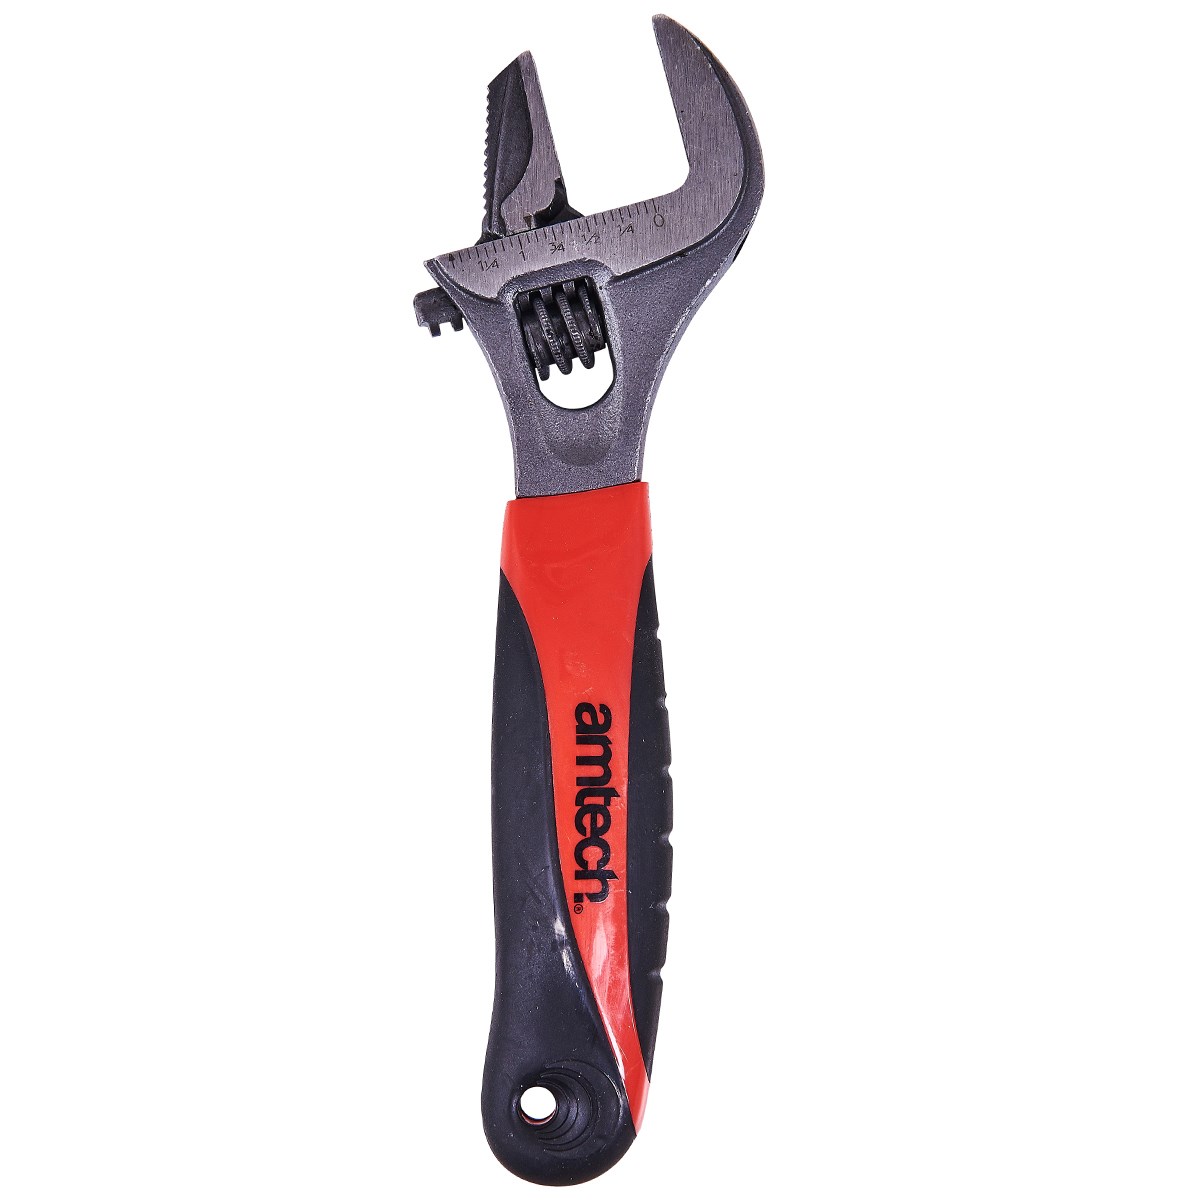 6" adjustable wrench AM-Tech heavy duty adjustable cushioned grip C1682 